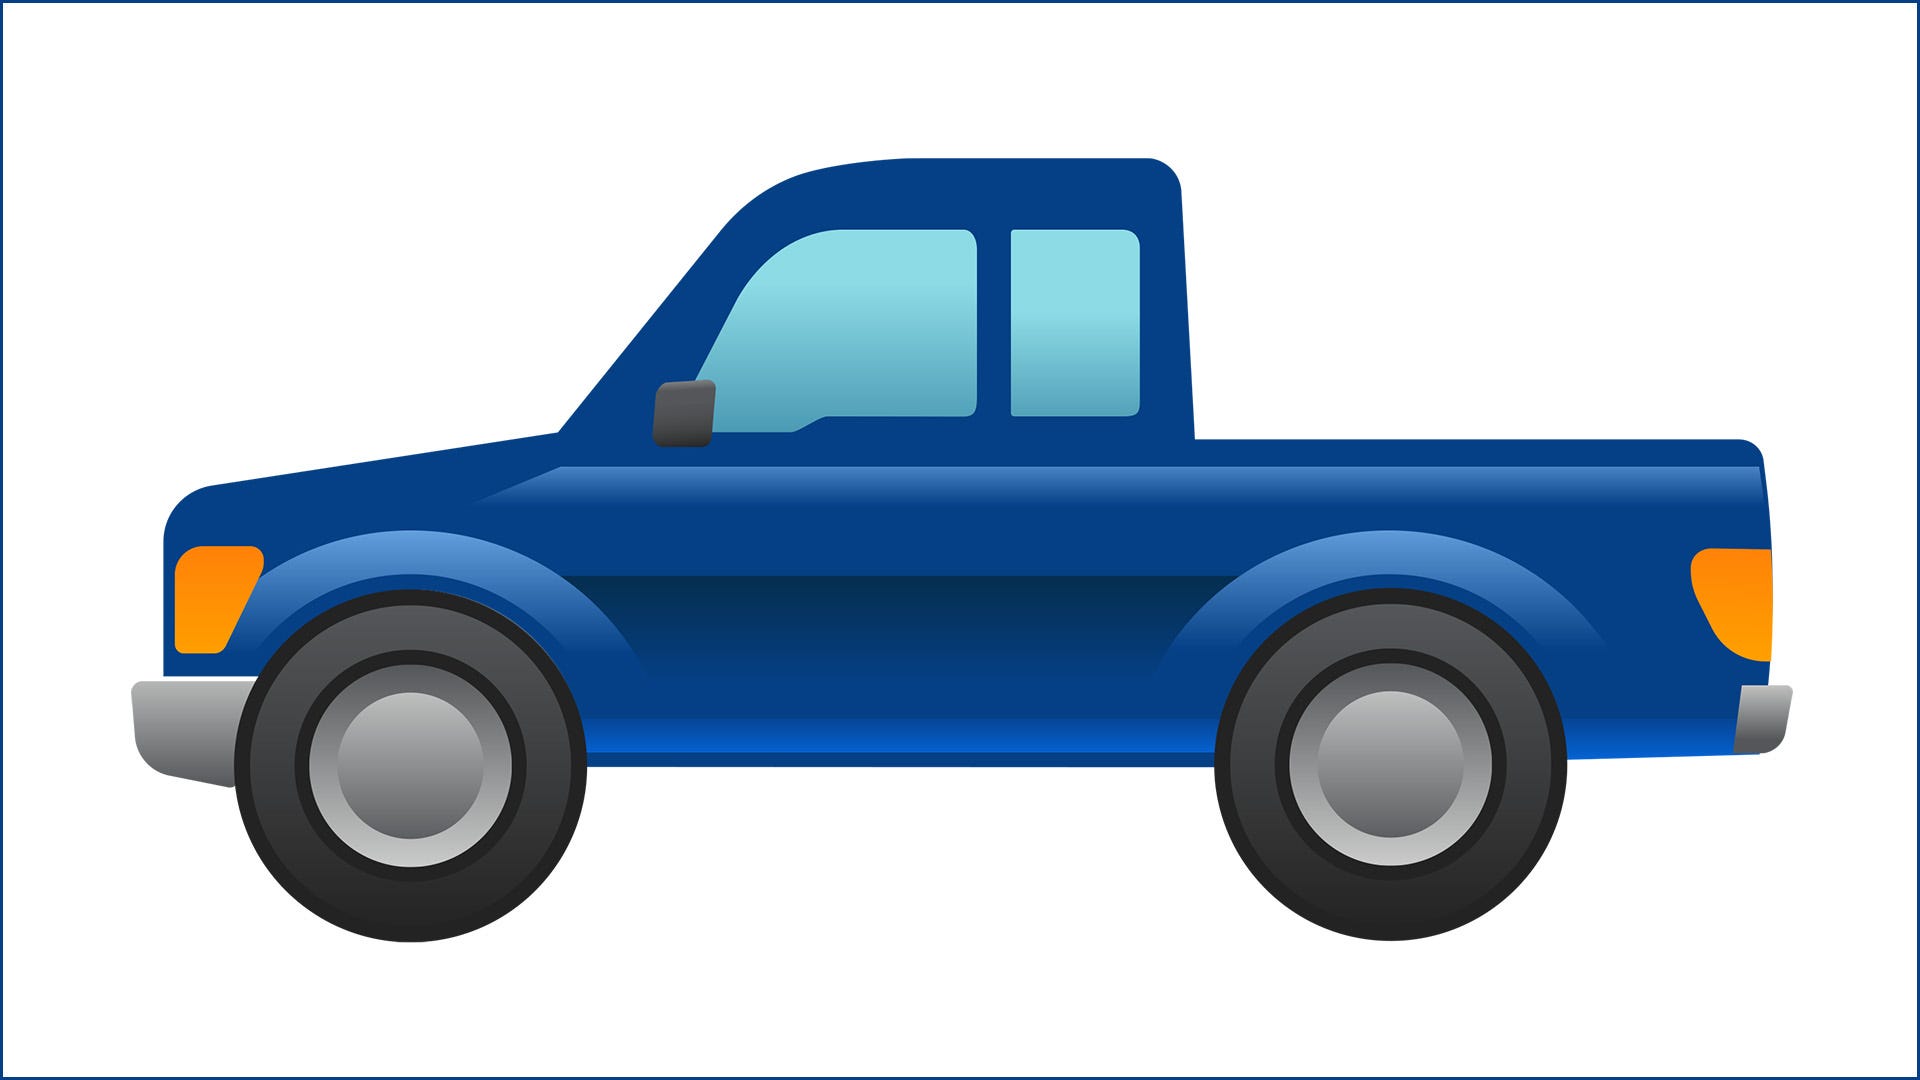 Ford has petitioned the Unicode Consortium to add a pickup truck to the  approved list of 3,000 emojis. The request has been shortlisted, which means it's likely to become a real emoji in 2020.